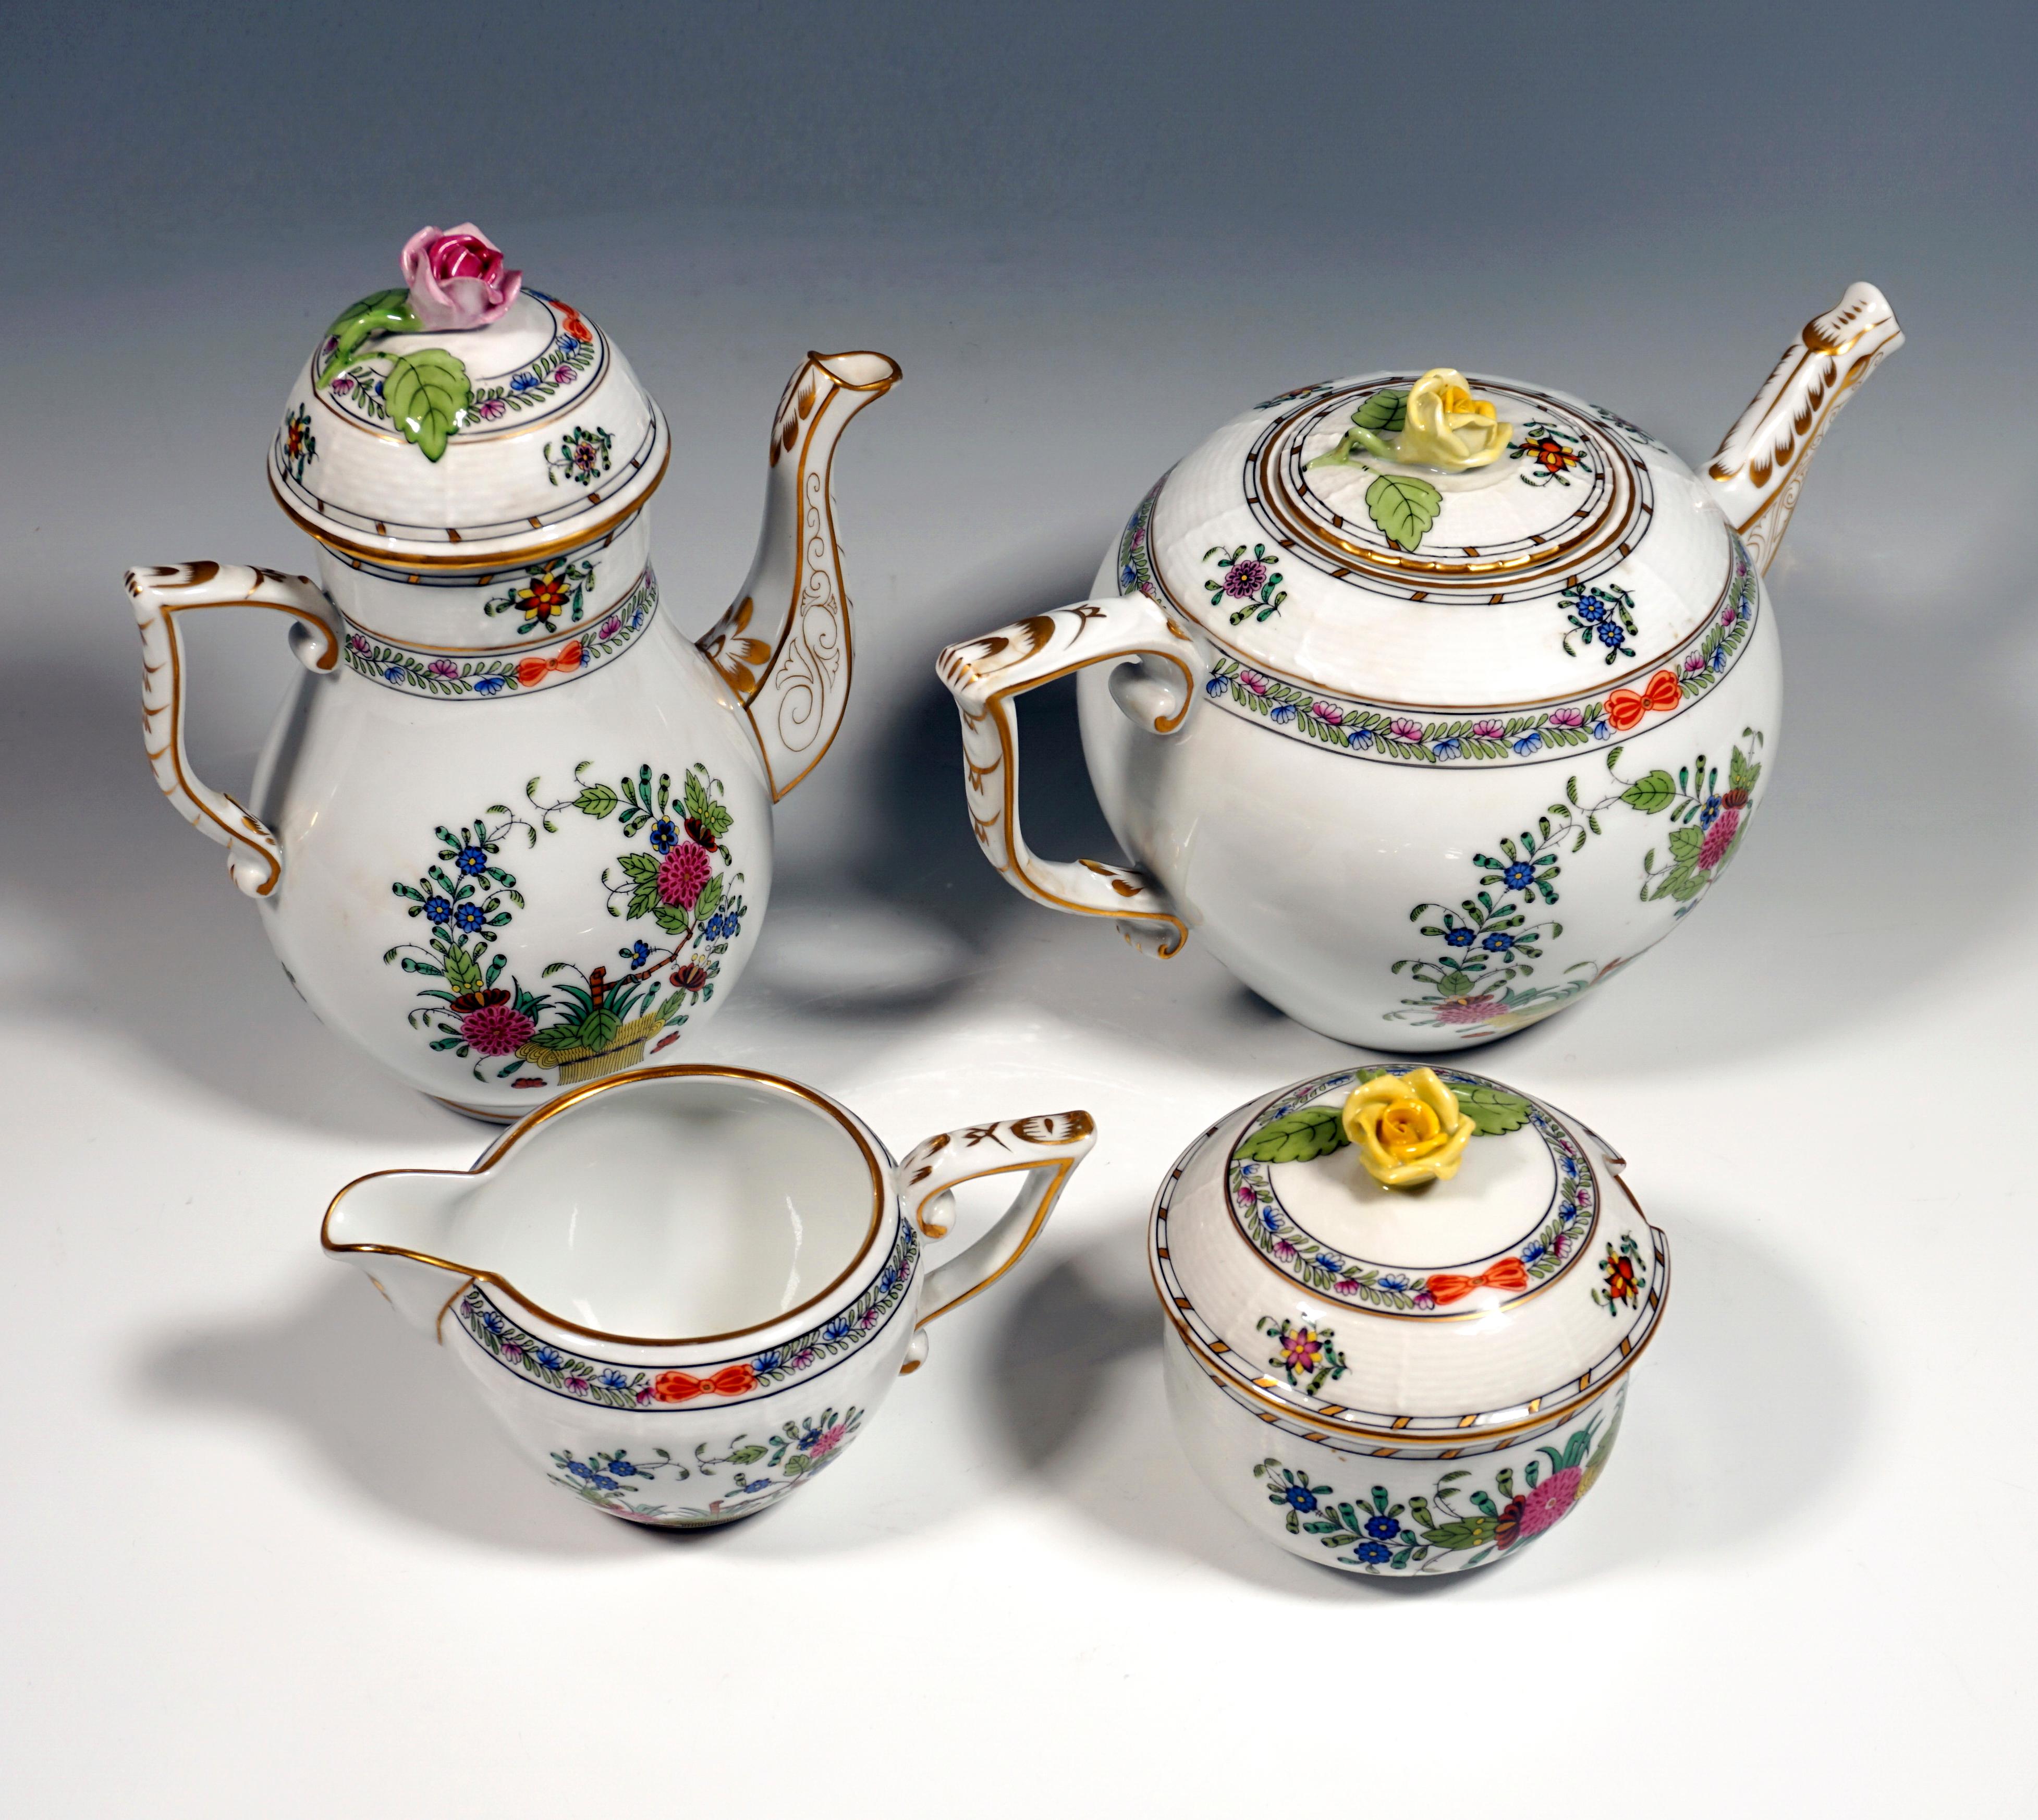 Japonisme Coffee and Tea Set for 8 Persons 'Fleurs des Indes' Herend Hungary, 20th Century